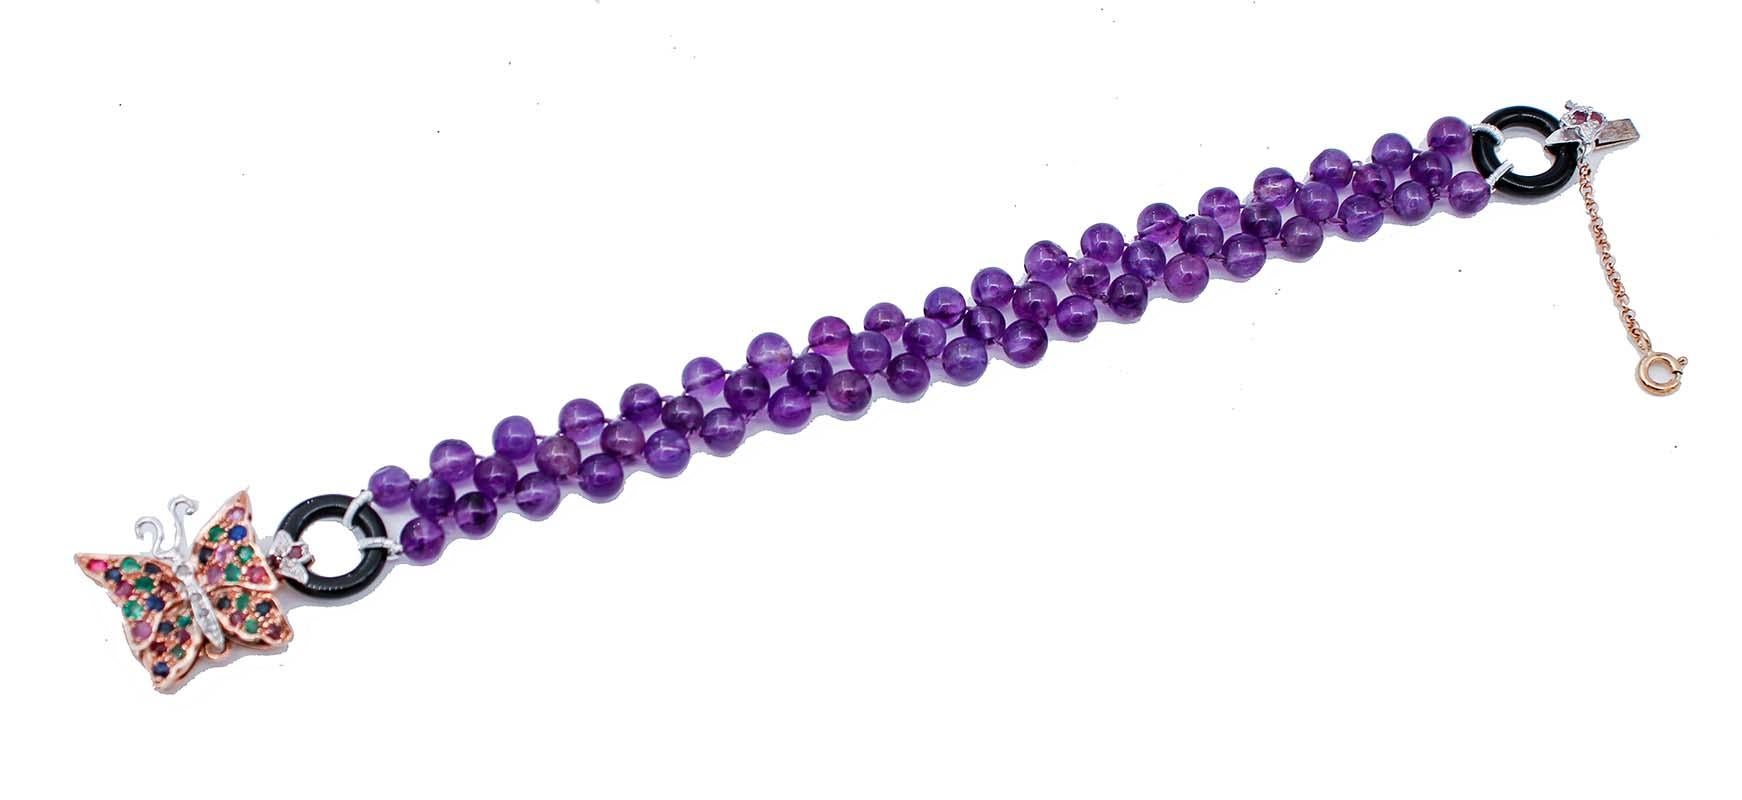 SHIPPING POLICY: 
No additional costs will be added to this order. 
Shipping costs will be totally covered by the seller (customs duties included).

Beautiful bracelet mounted with a intersection of amethyst spheres, two onyx ring as extremes and,